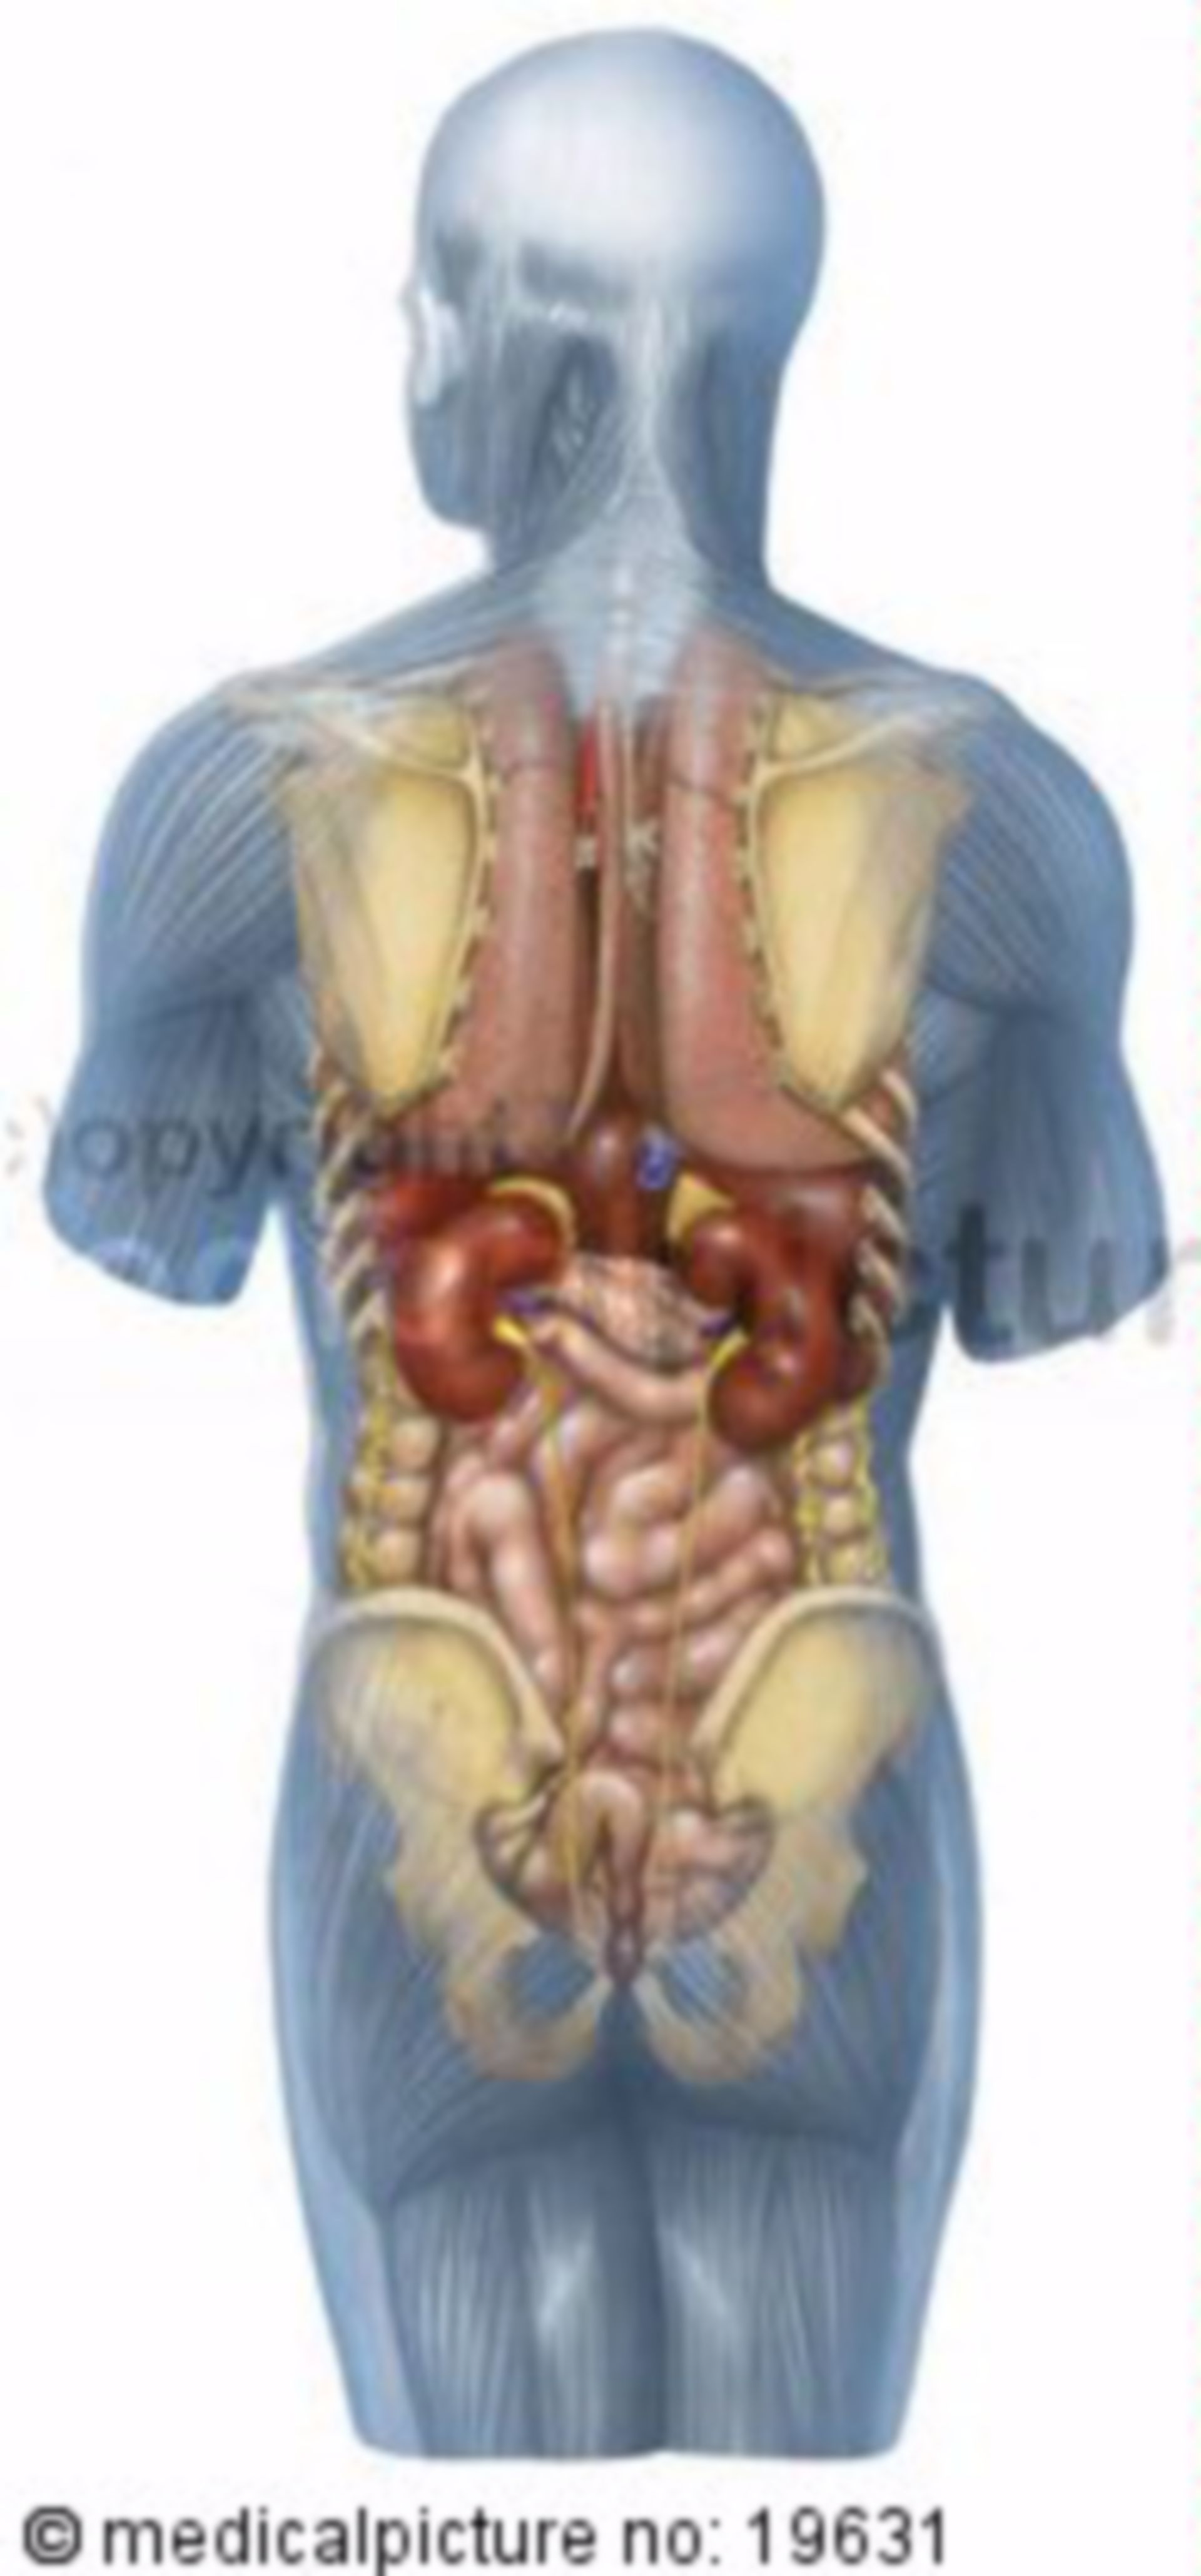 Thoracic and Abdominal Organs